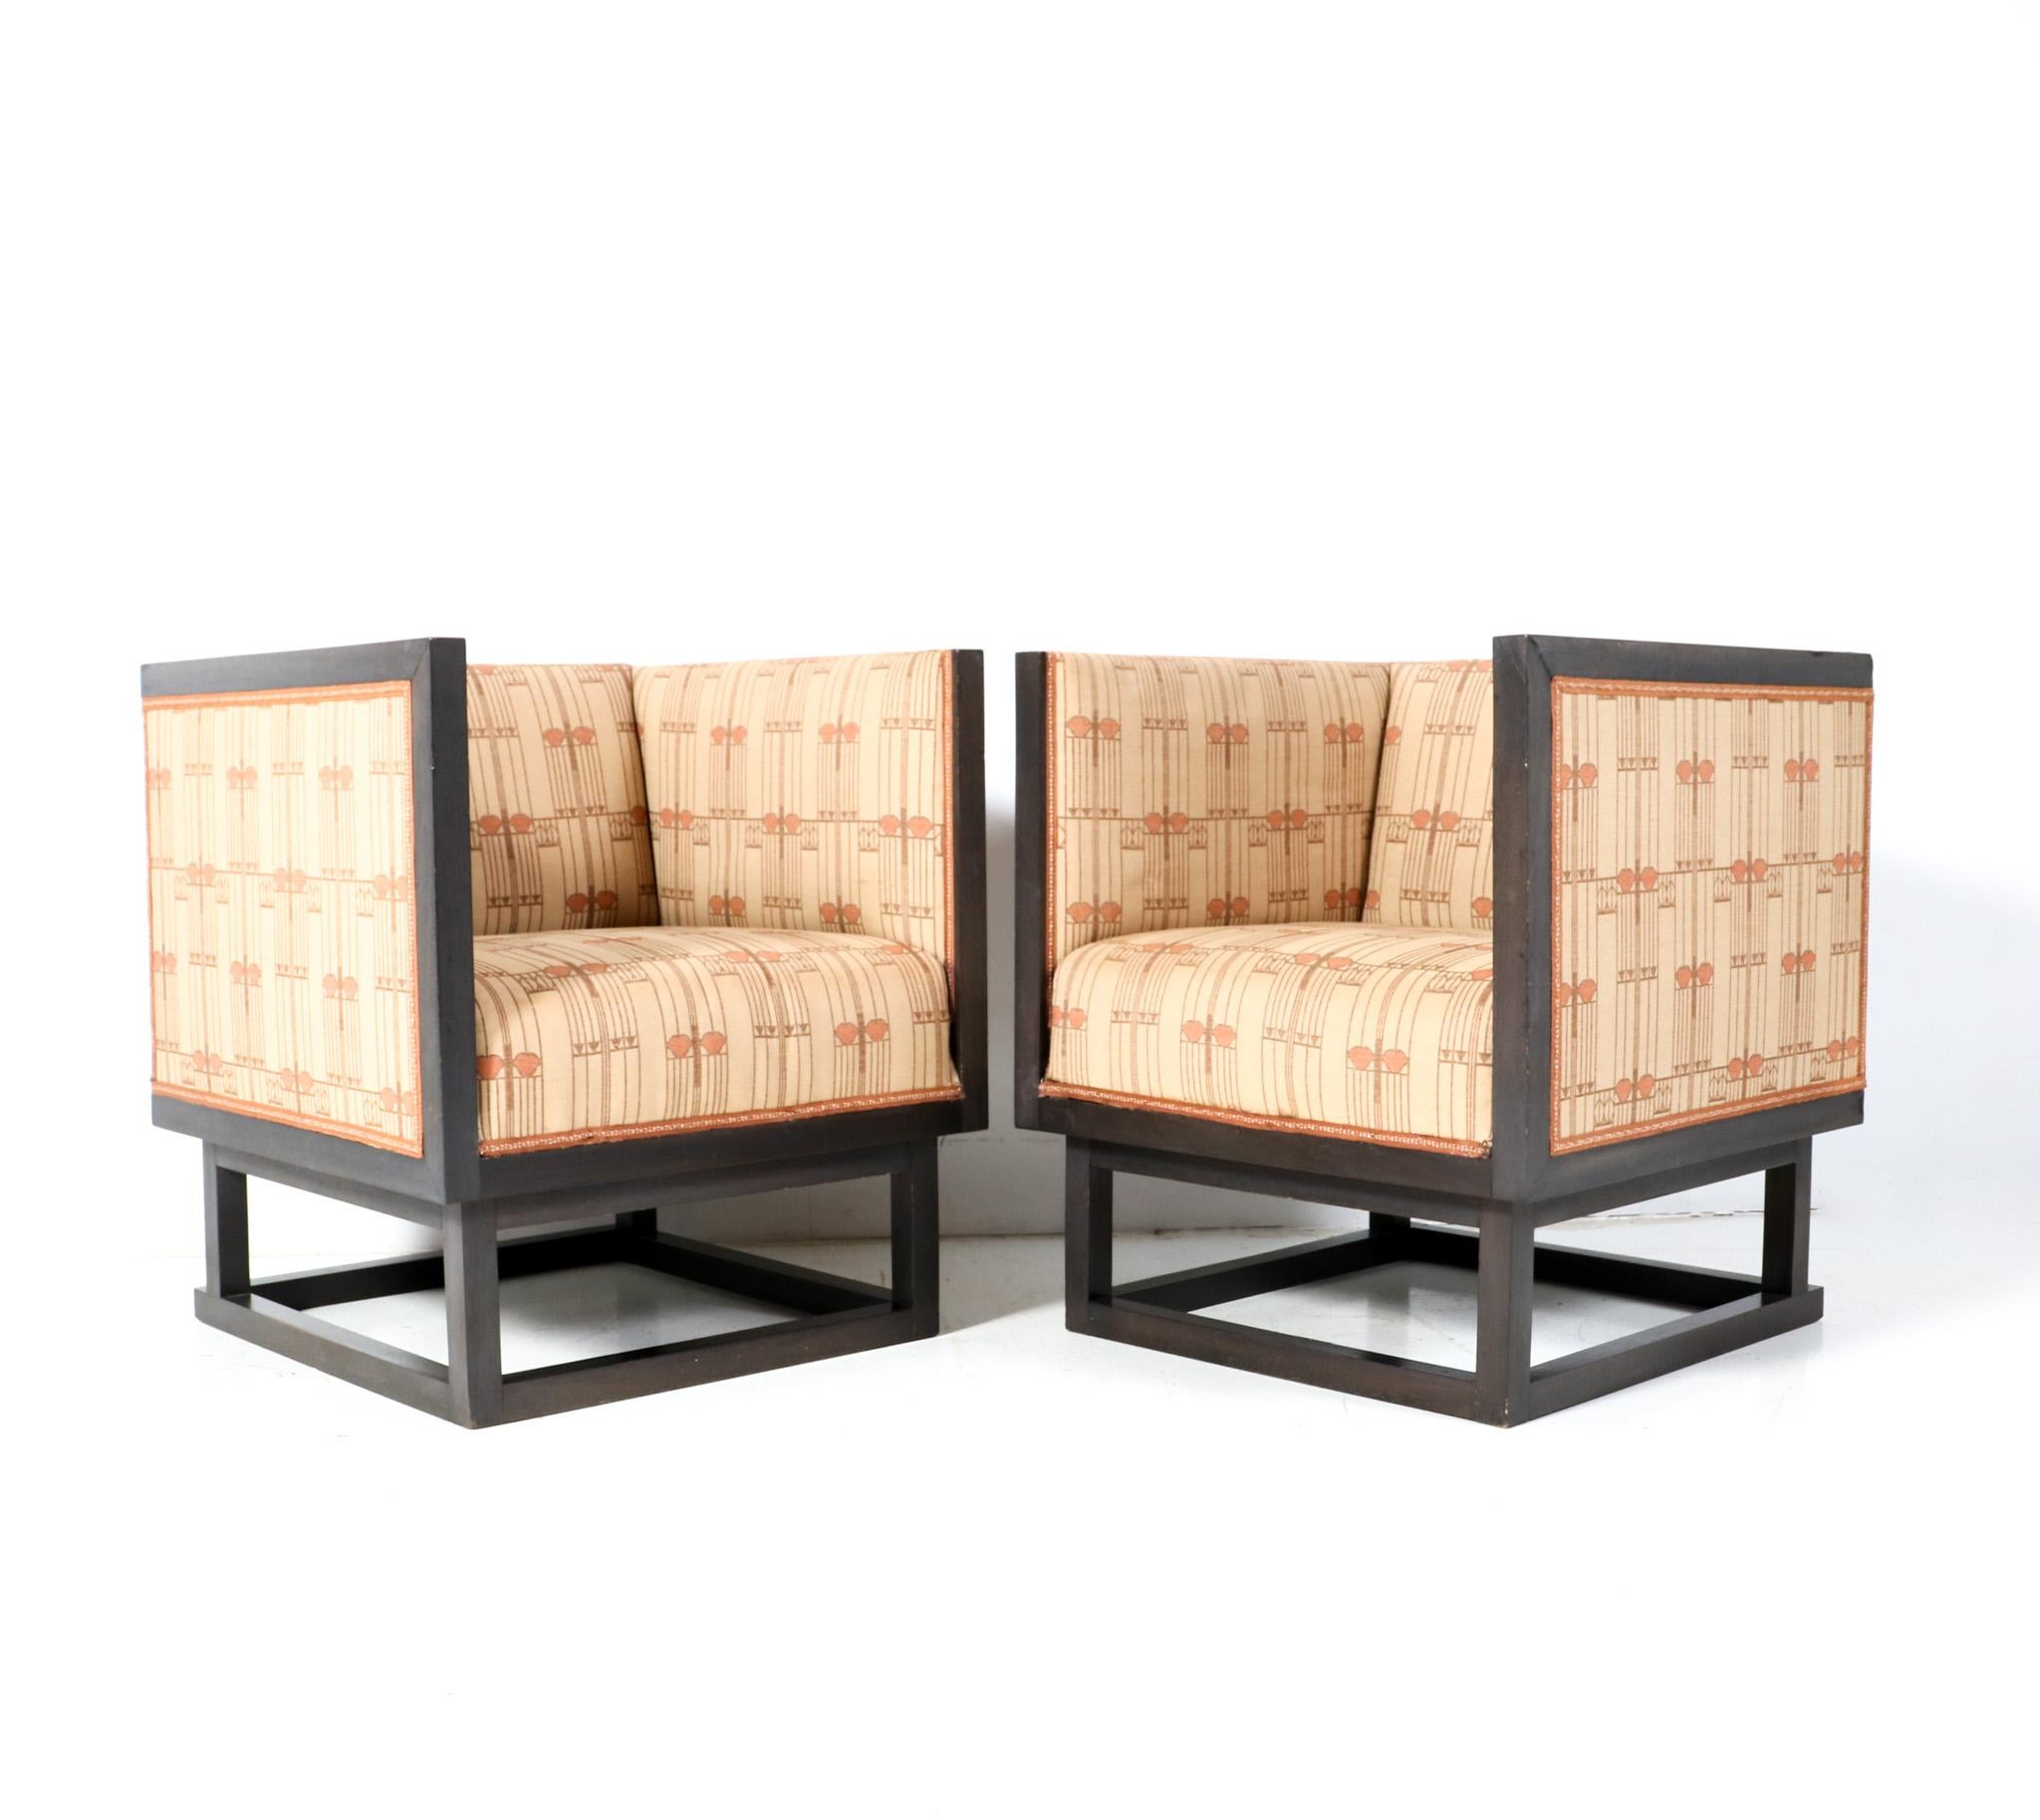 Austrian Pair of Vienna Secession Cabinet Chairs by Josef Hoffmann for Wittmann, 1903